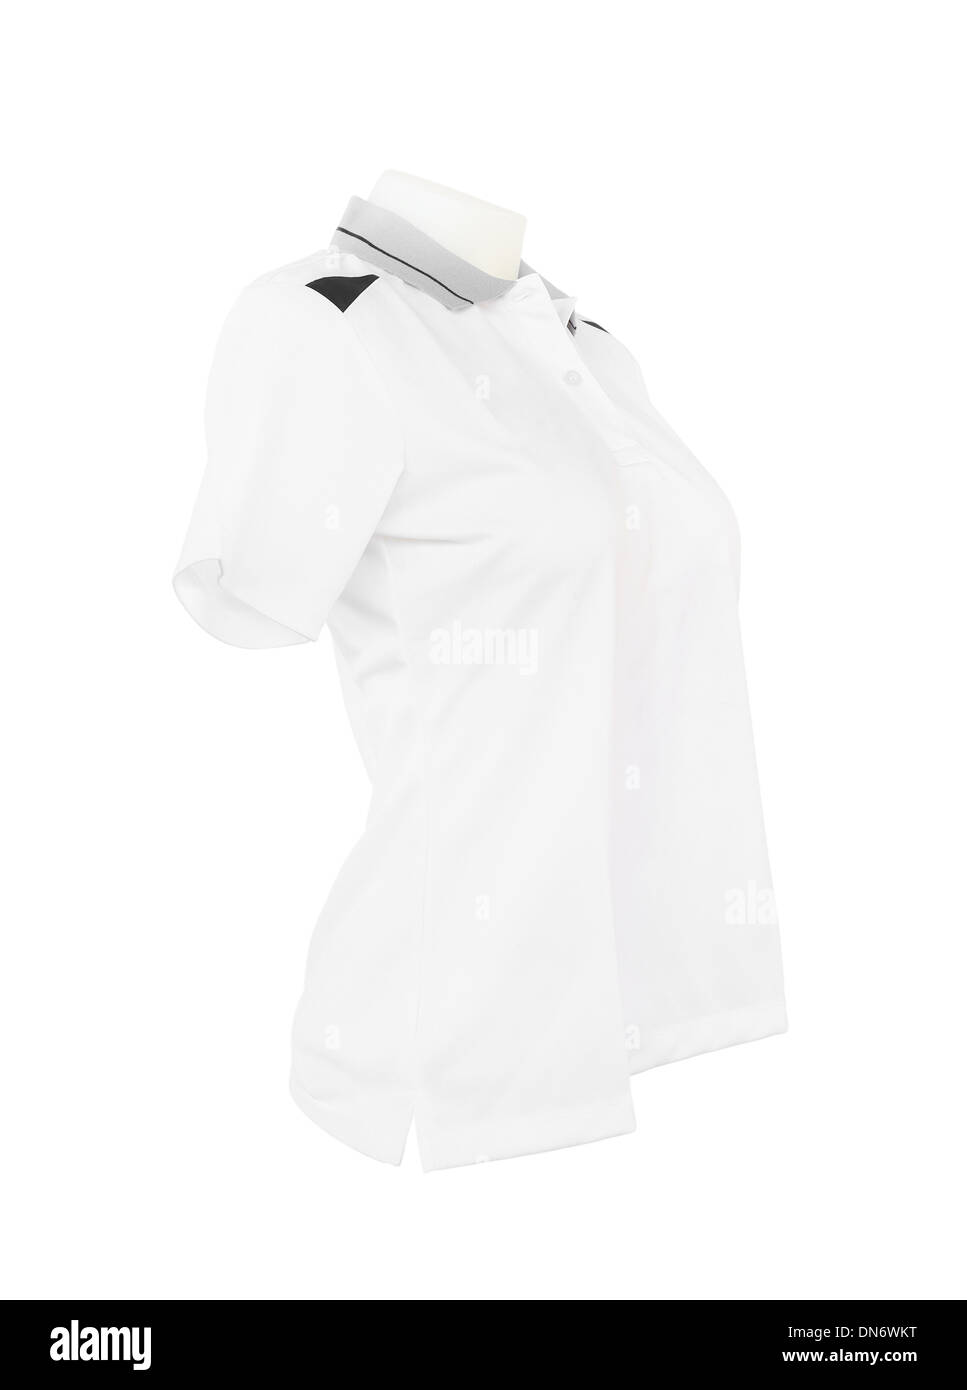 female shirt template on the mannequin on white background (with clipping path) Stock Photo